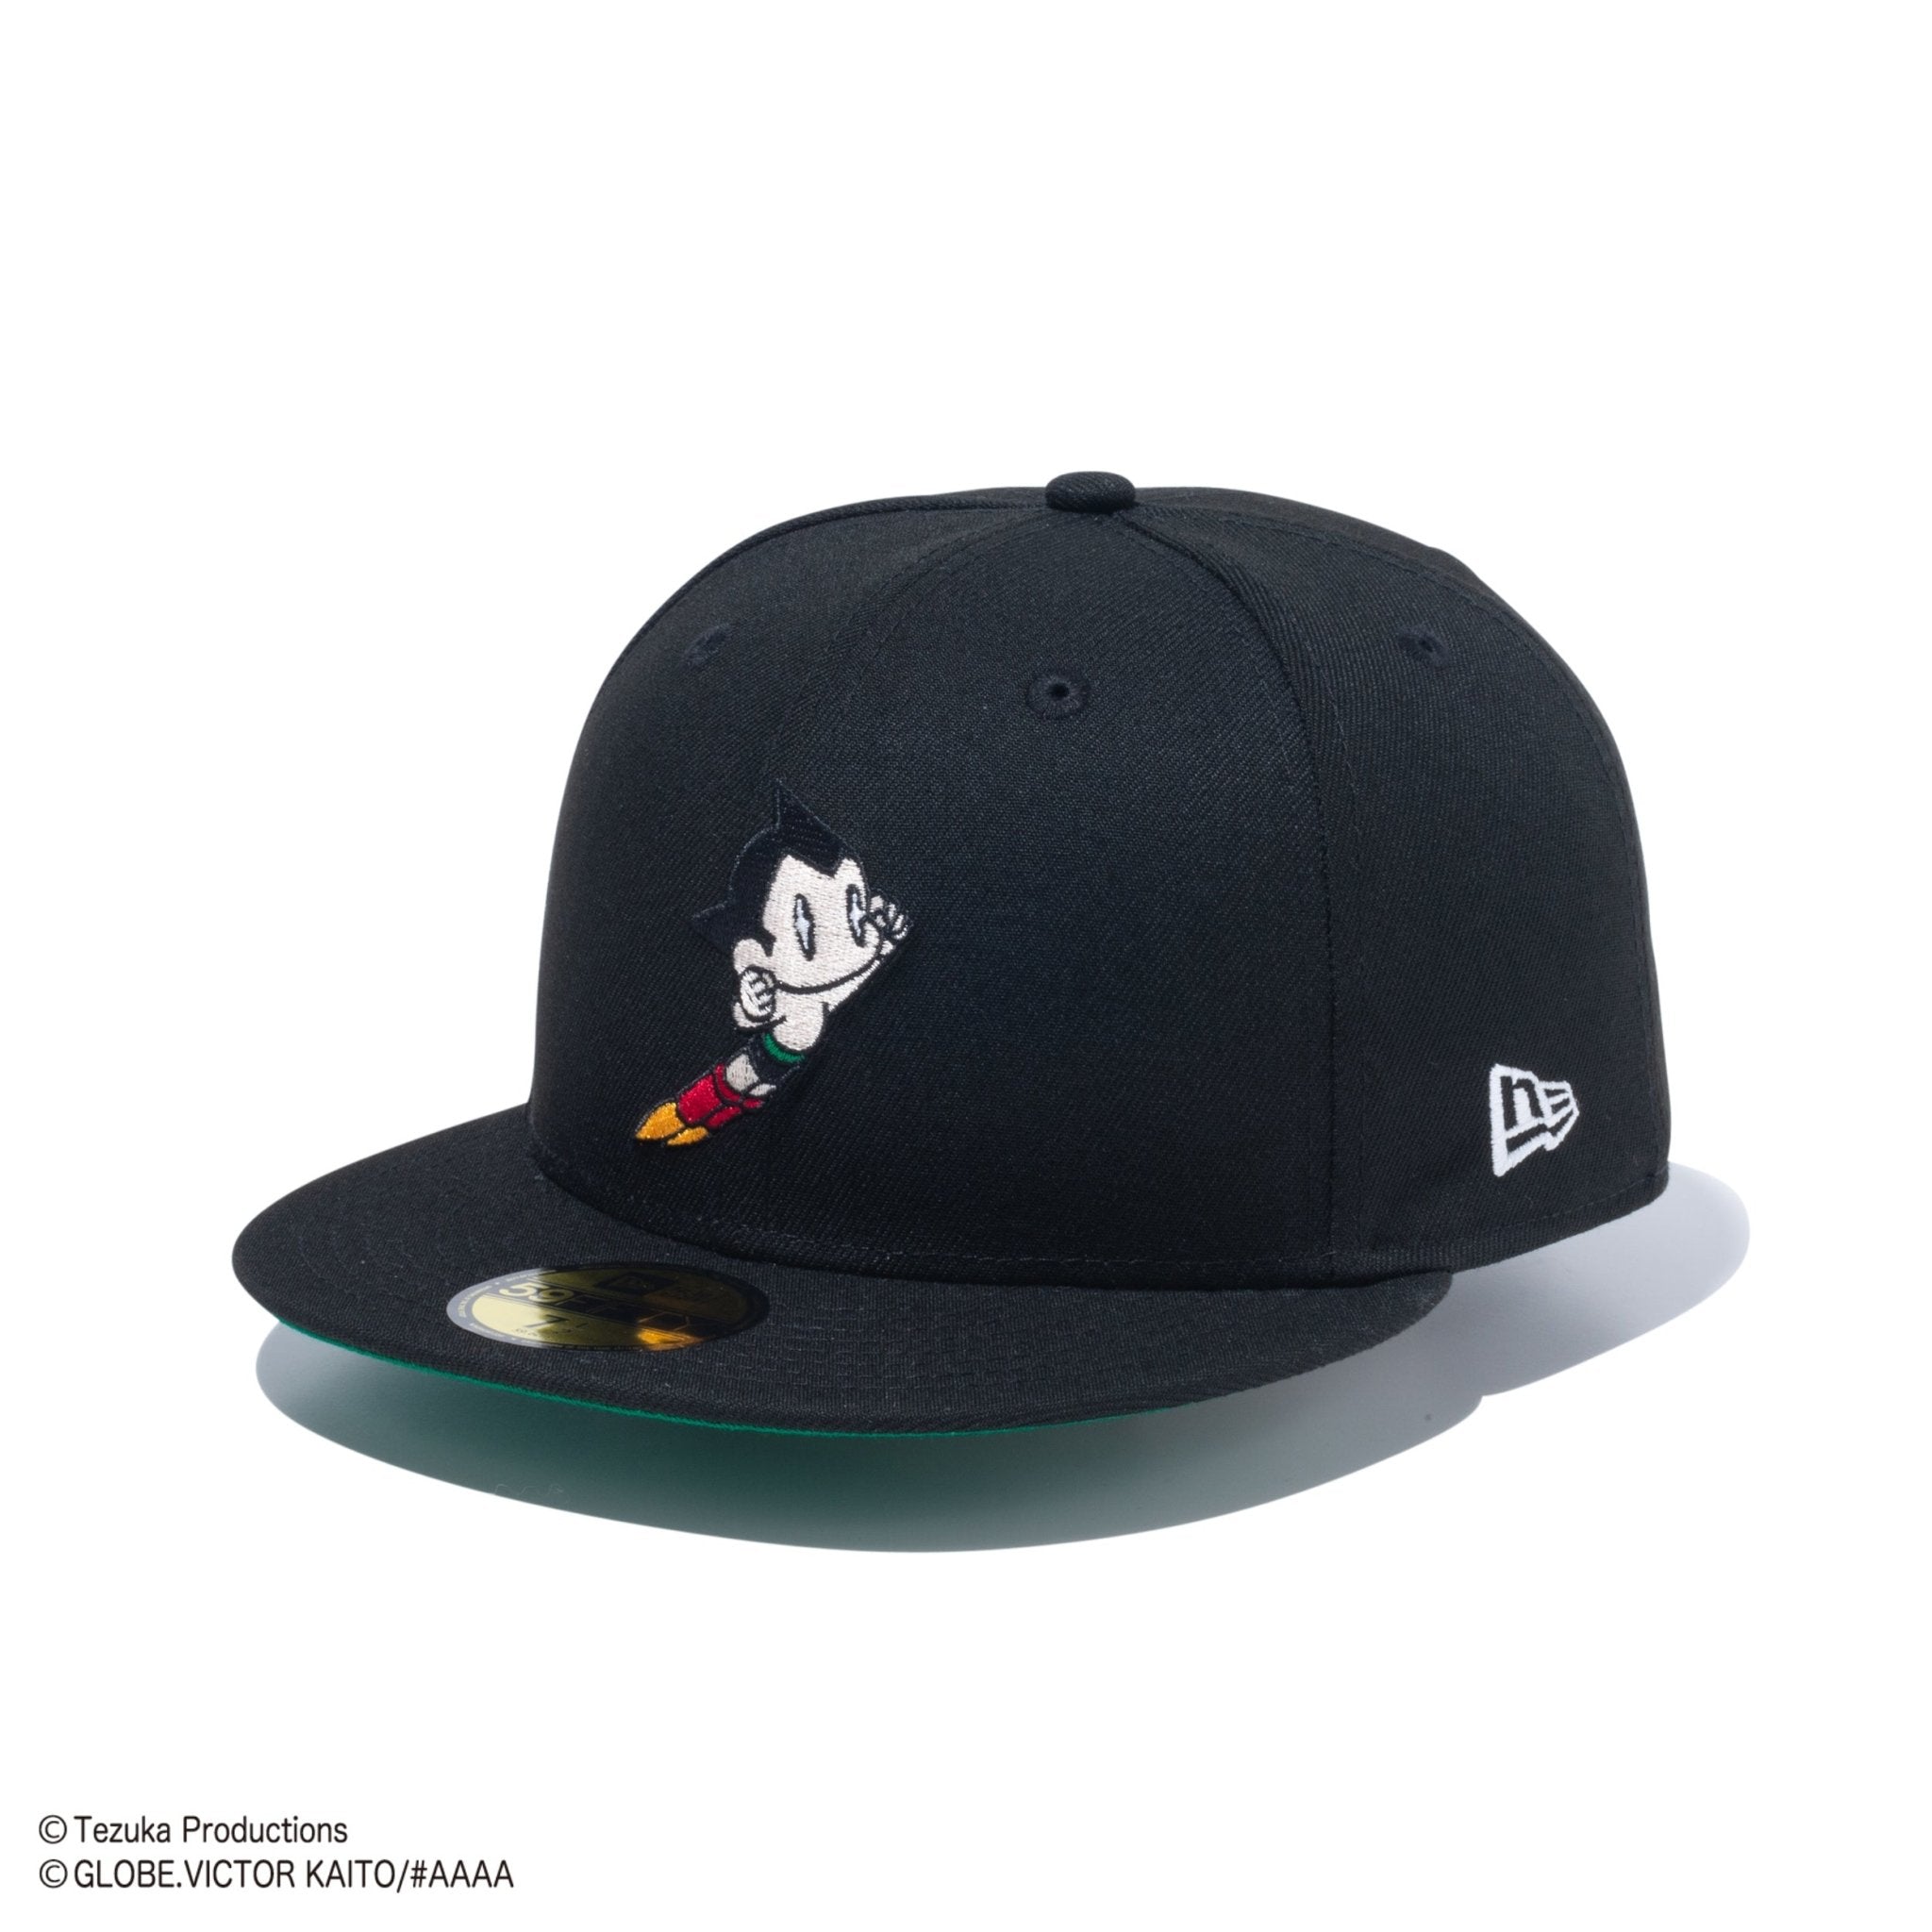 59FIFTY NEXT ATOM for the future Produced by #AAAA アトム